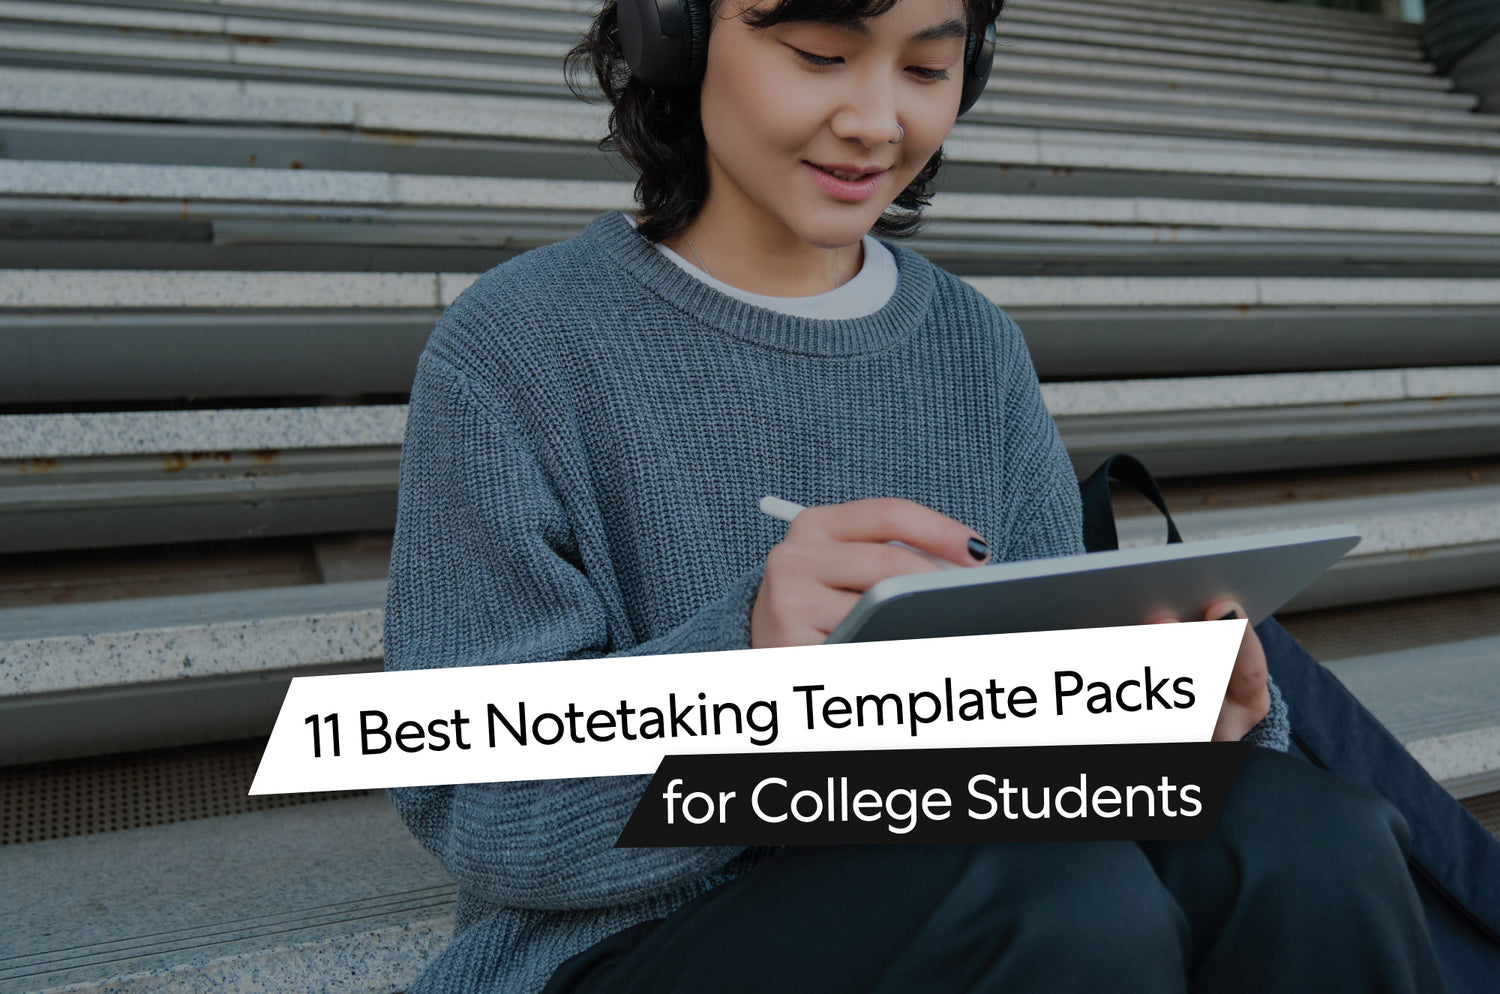 11 Best Notetaking Template Packs for College Students